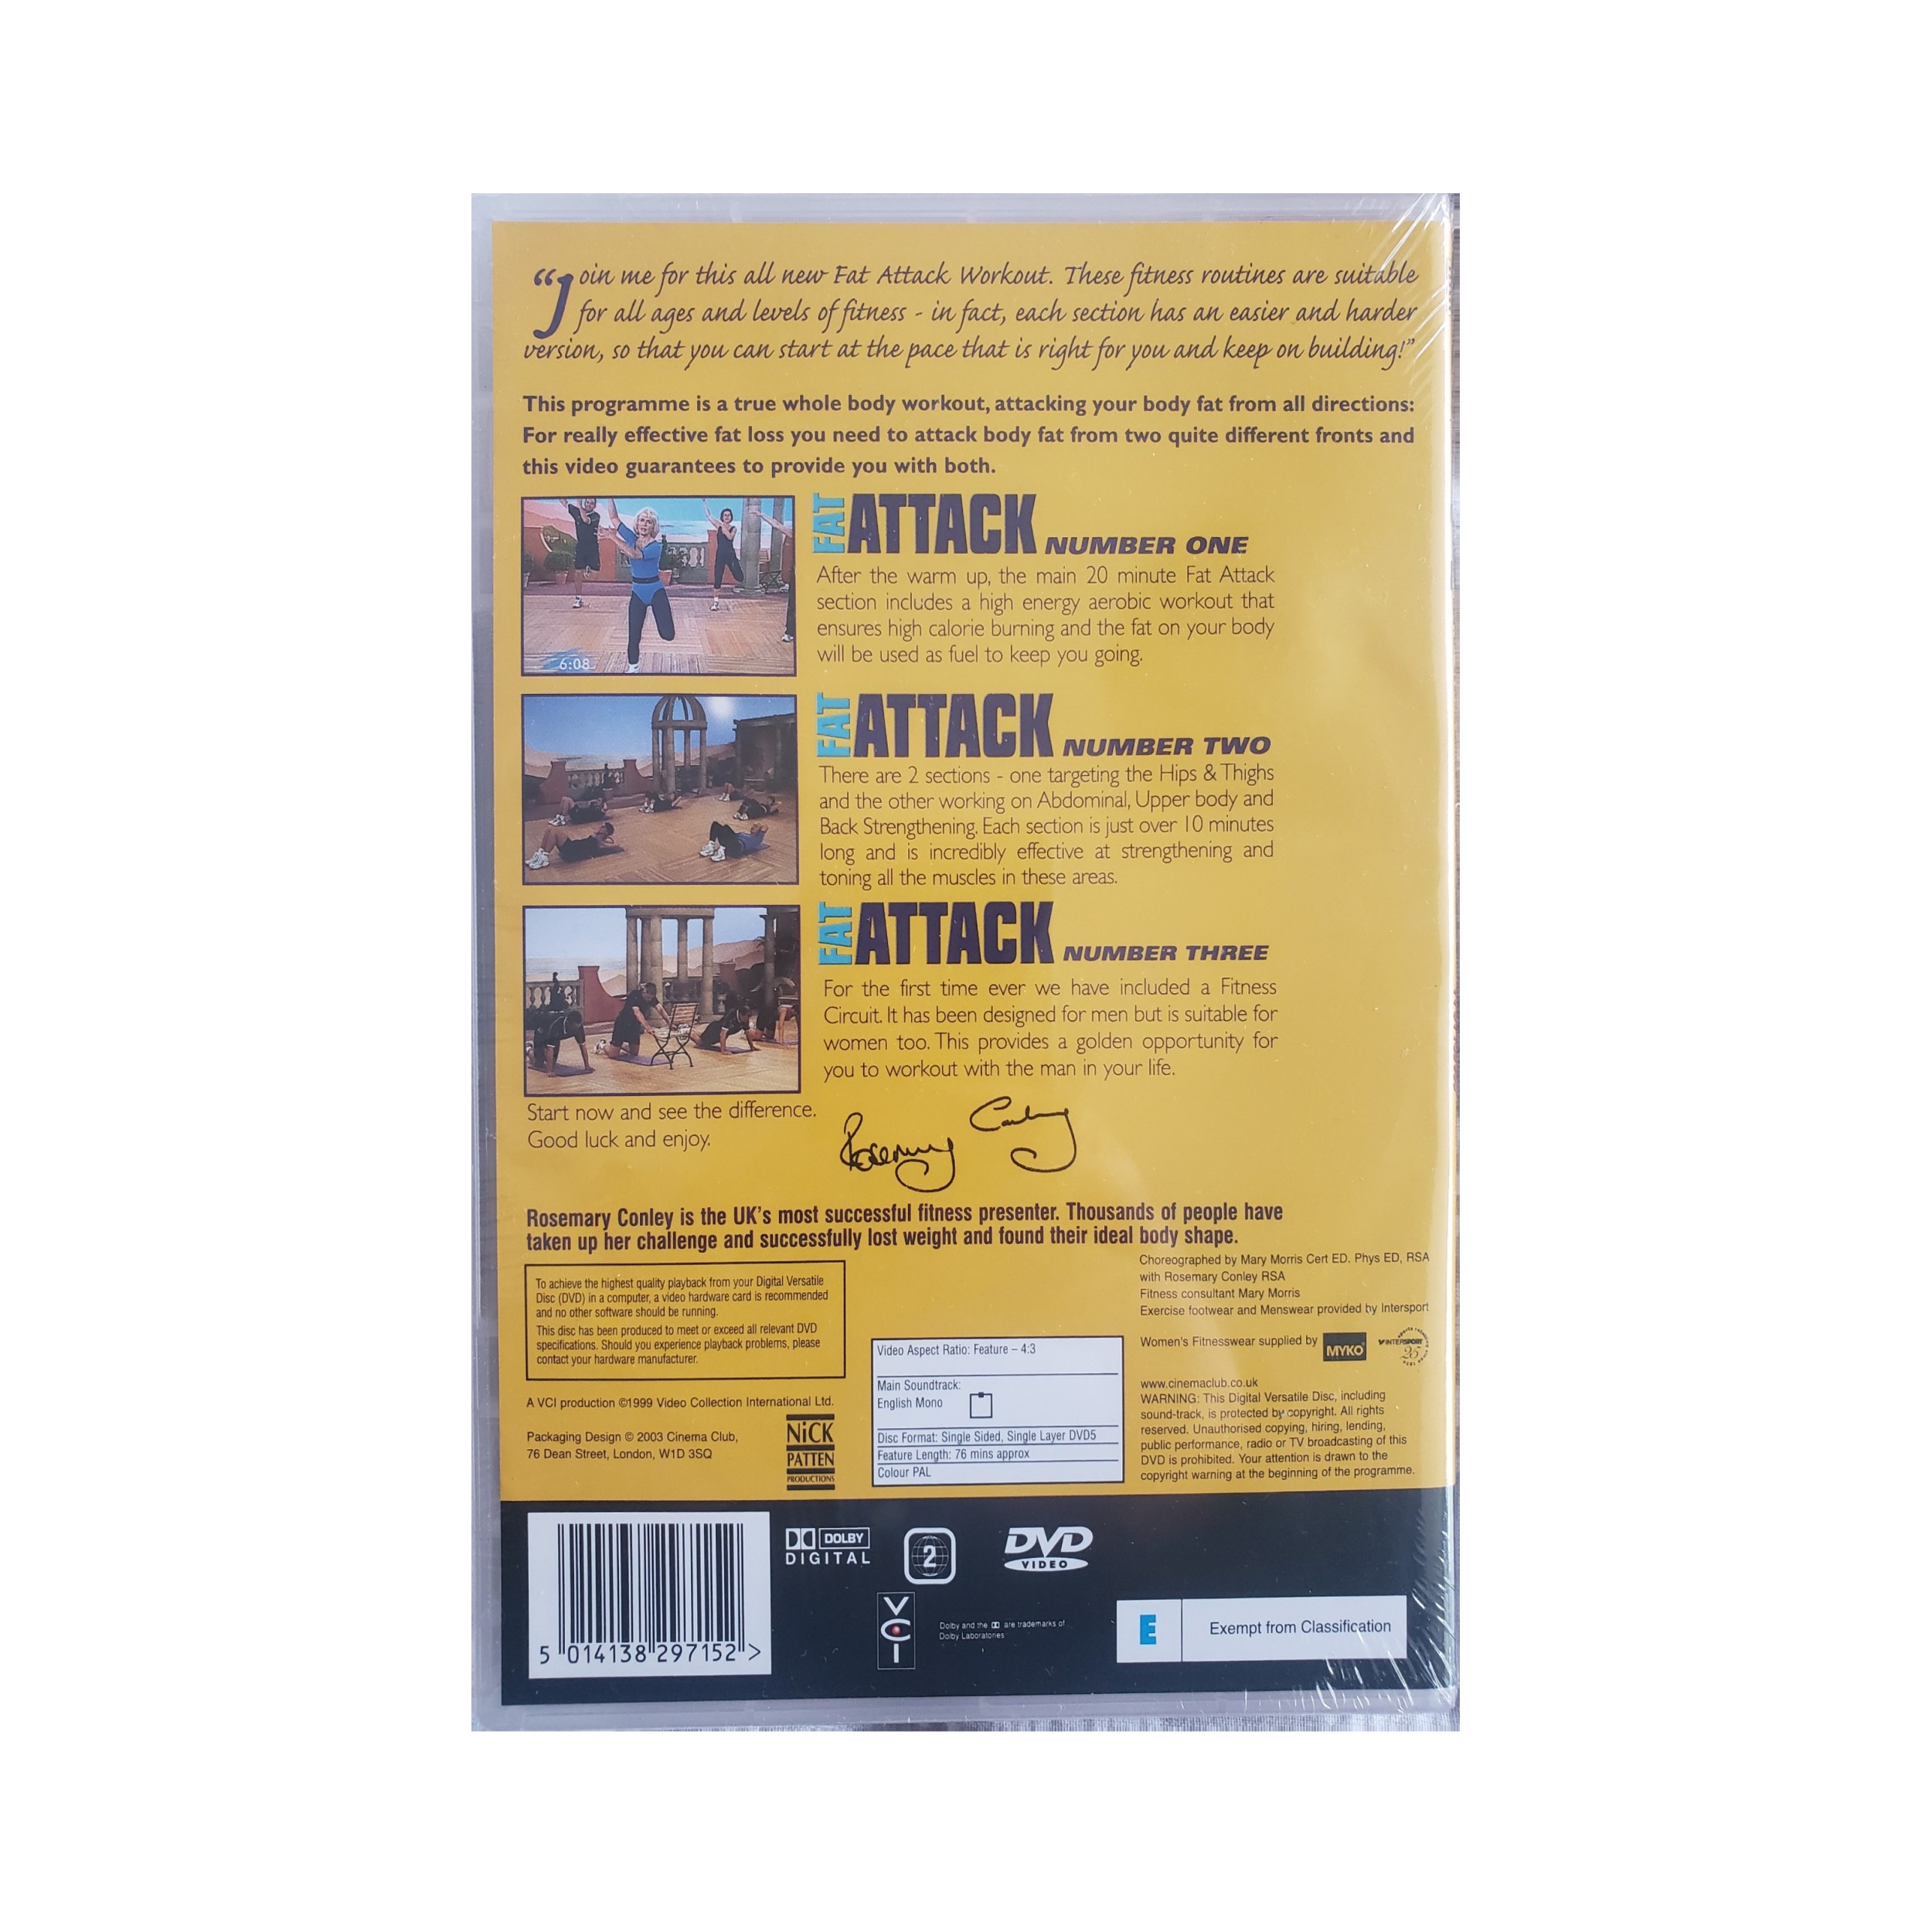 Image showing the back cover of Rosemary Conley's Fat Attack Workout DVD